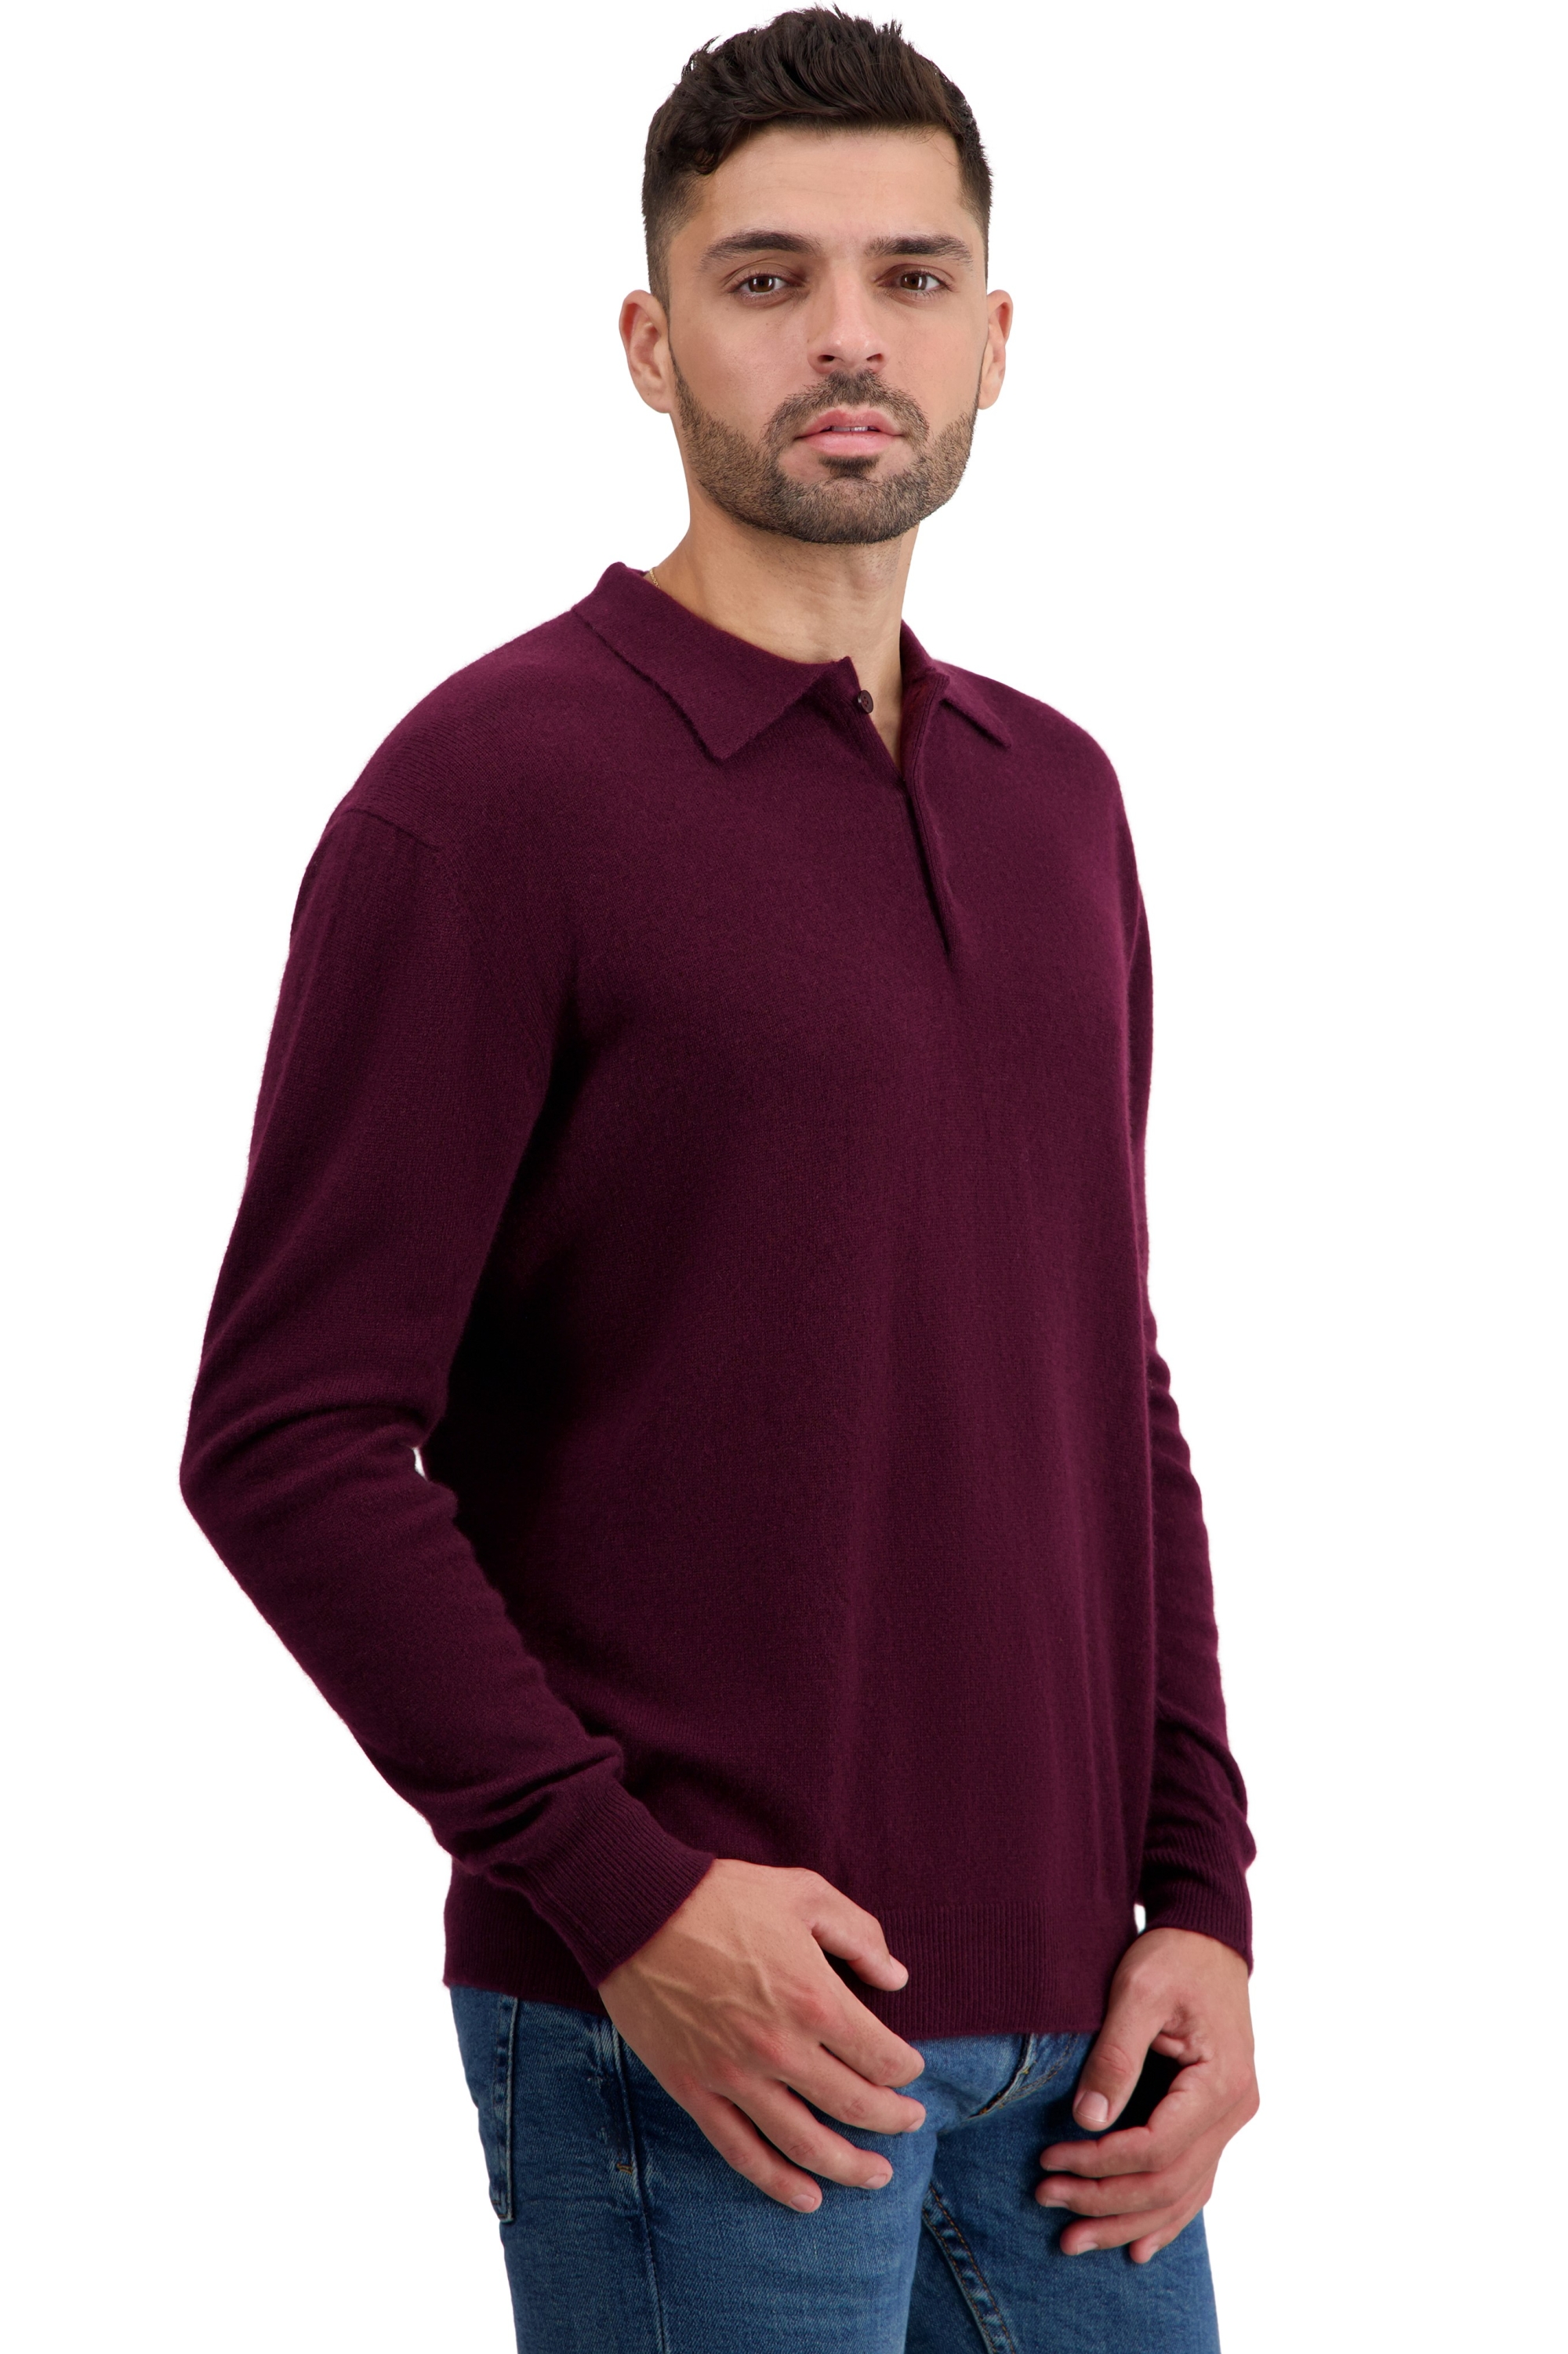 Cachemire pull homme tarn first bordeaux 2xl